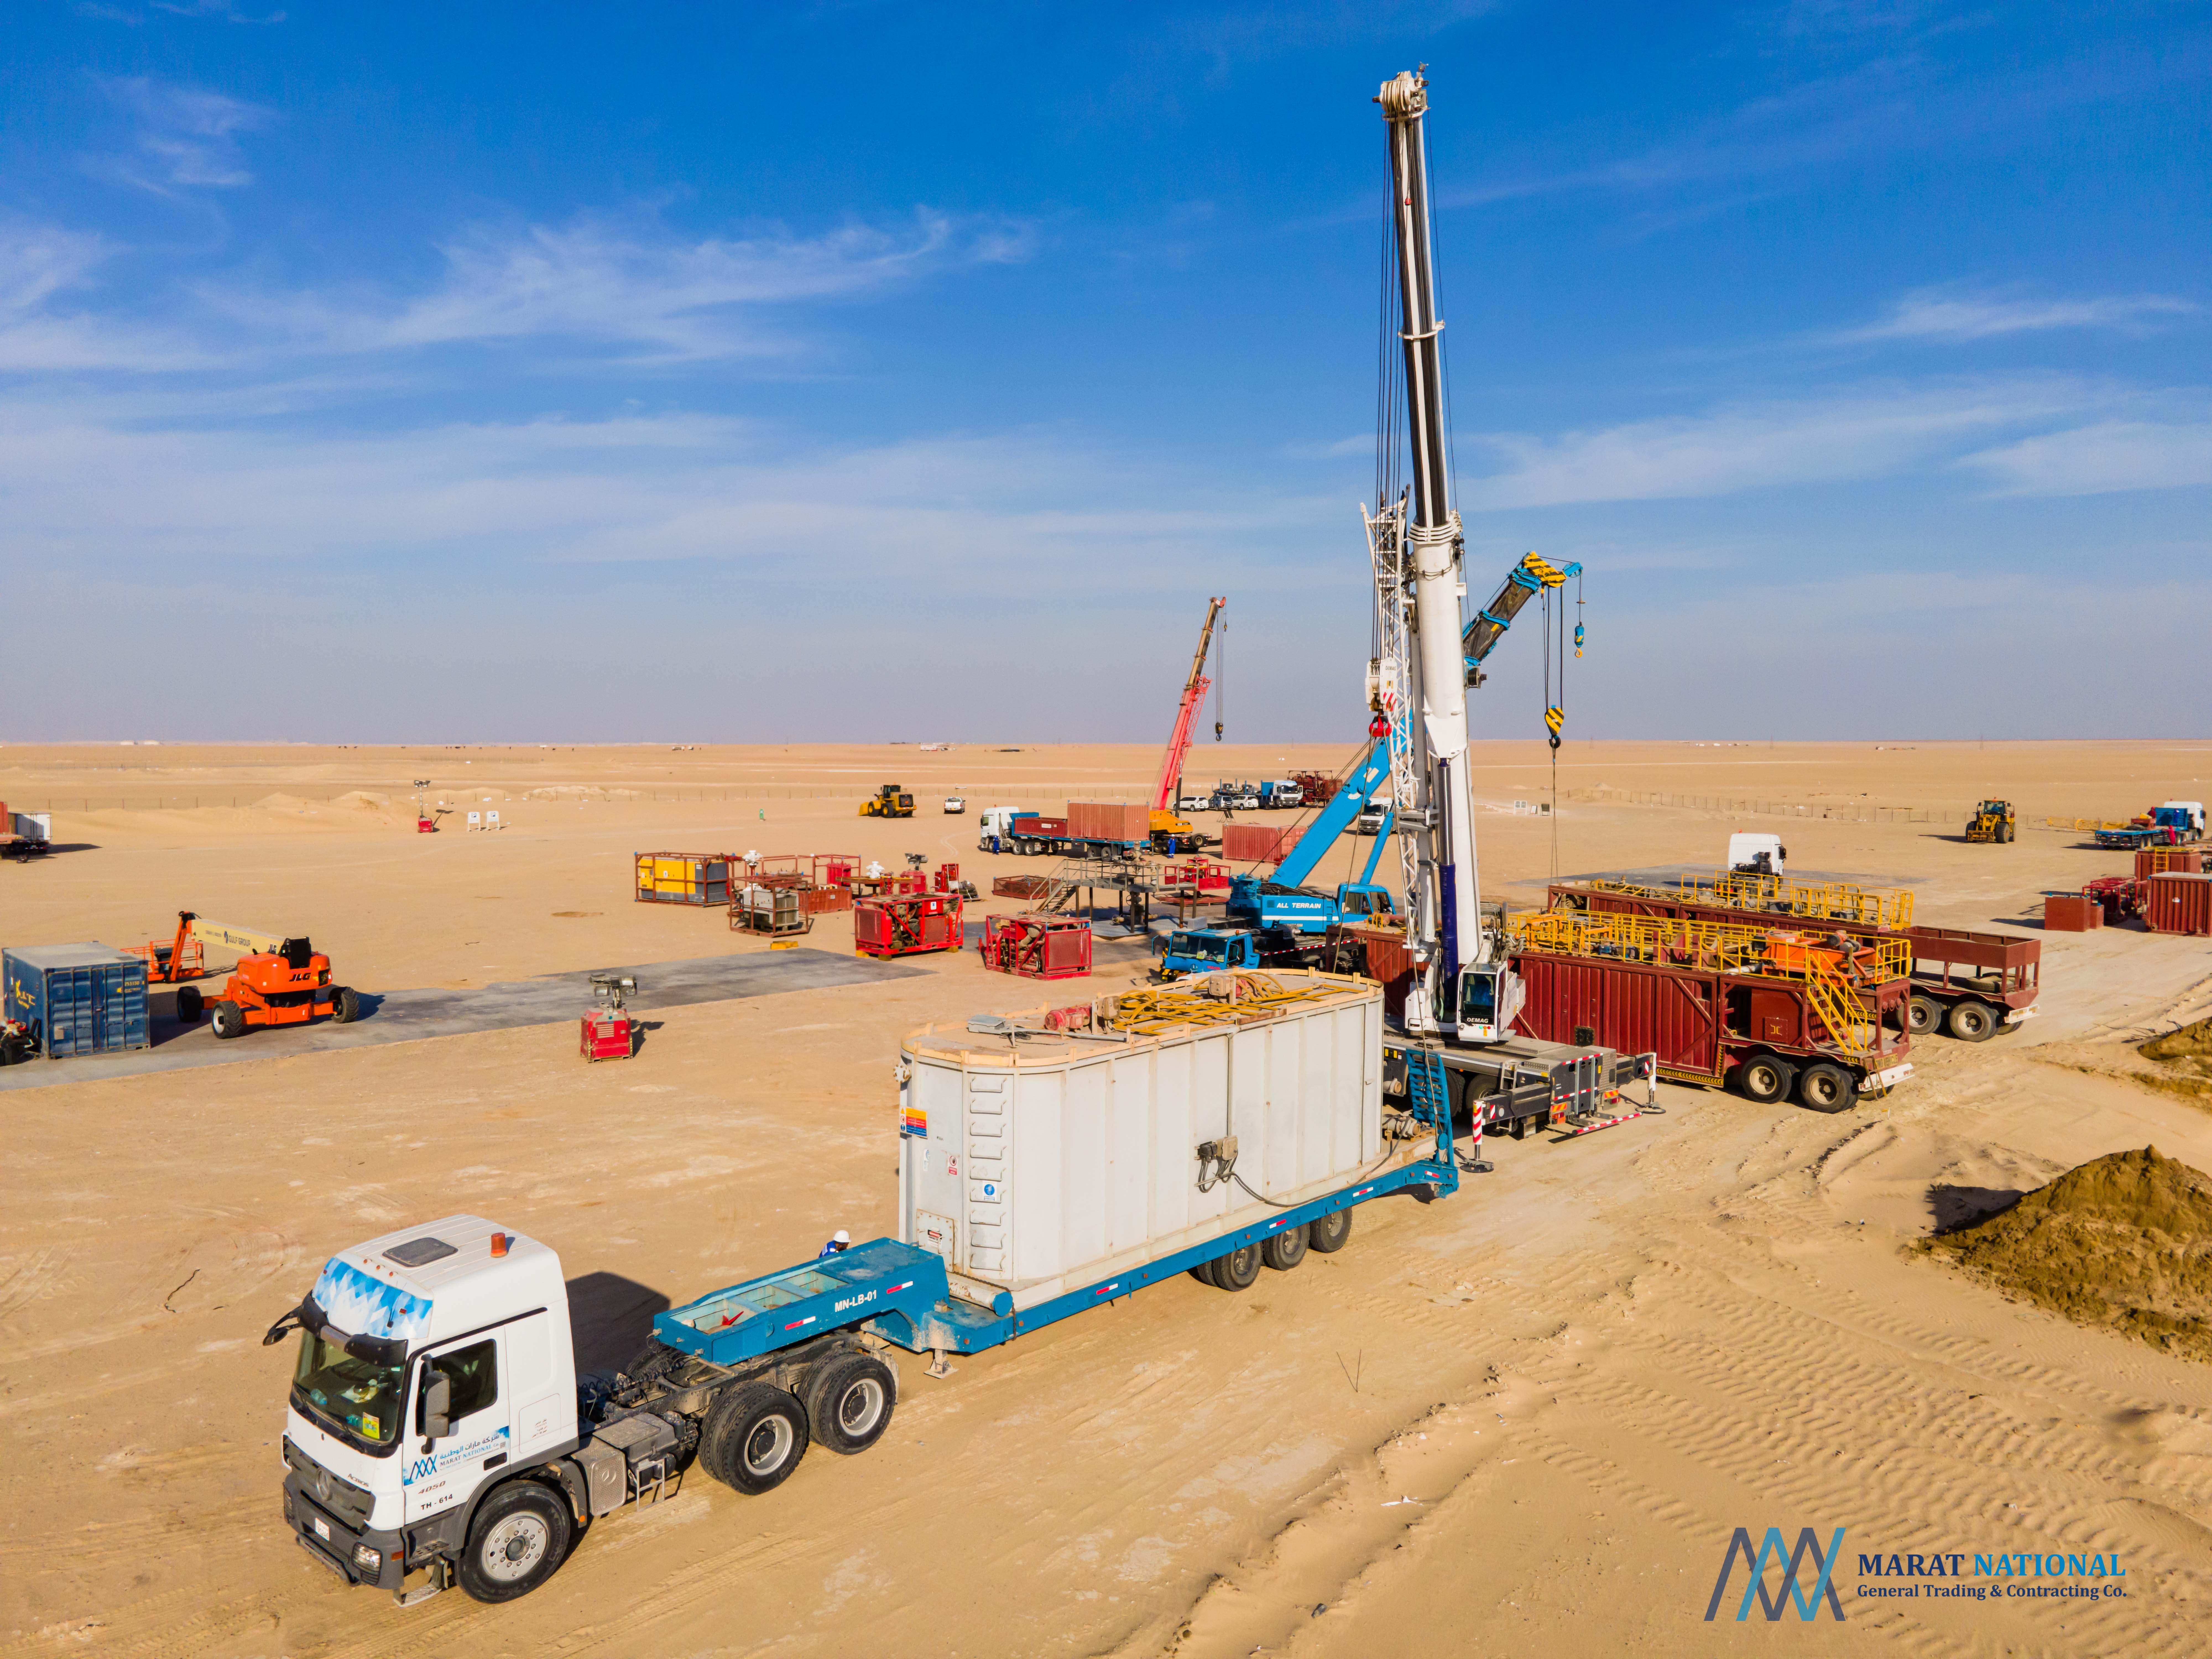 OIL FIELD SUPPORT & SERVICES